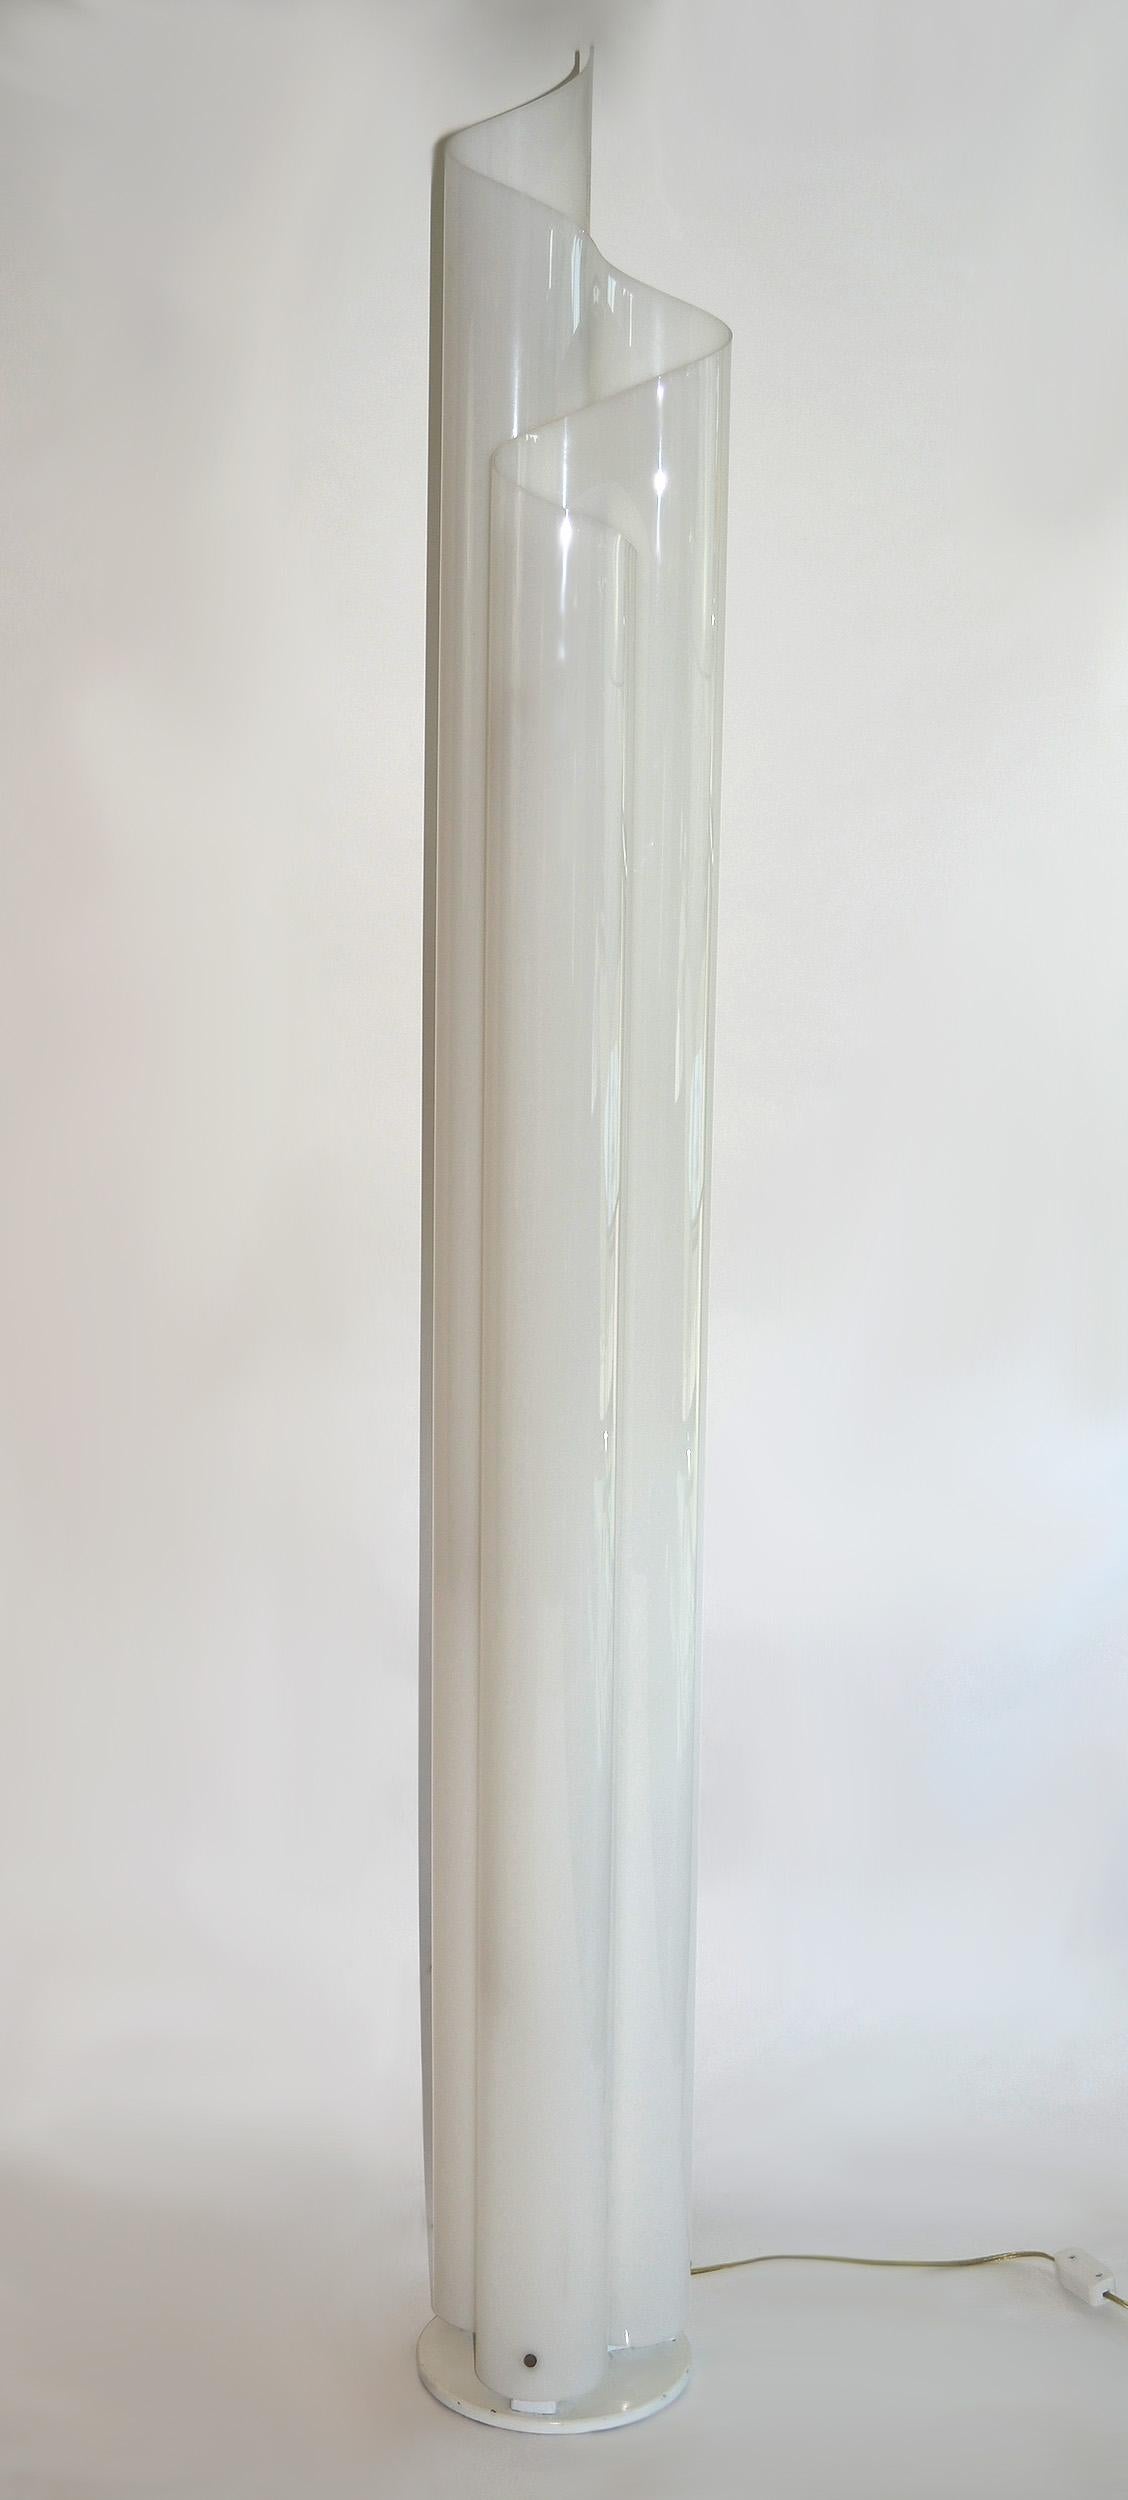 Vico Magistretti for Artemide Italian chimera floor lamp, 1960s. The chimera floor lamp model designed by Vico Magistretti for Artemide features a folded diffuser in white opal methacrylate, and base in white enameled metal. Three bulbs.
    